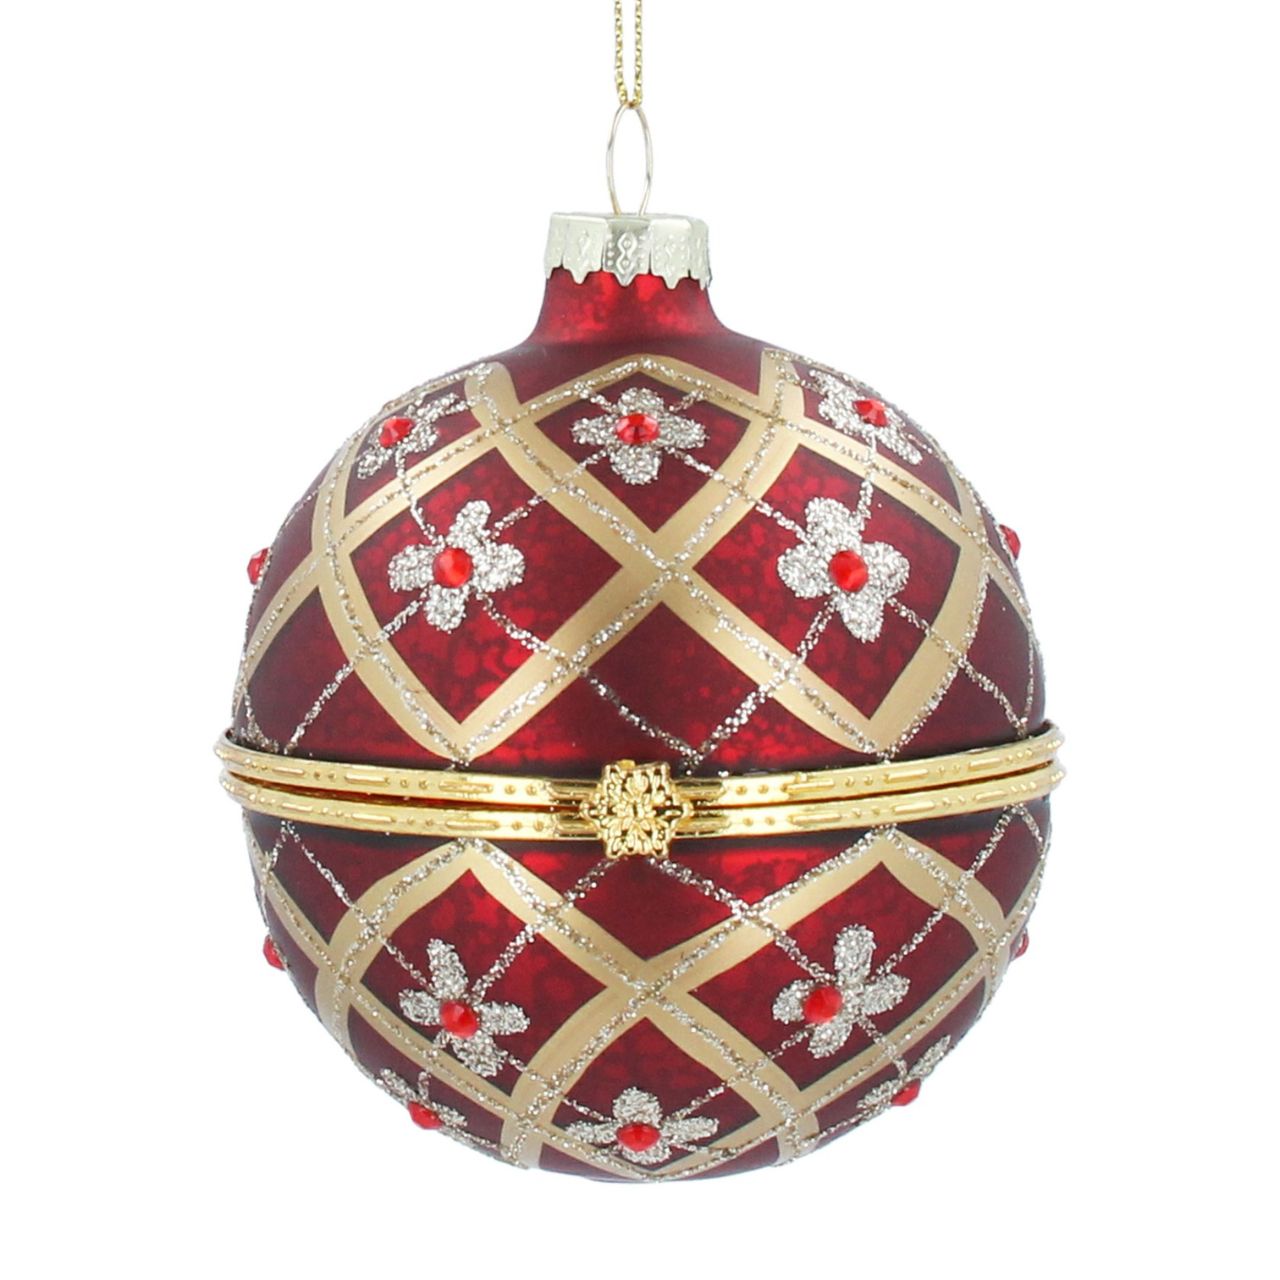 Gisela Graham Red & Gold Floral Trellis Glass Christmas Bauble Opening  Show off your holiday spirit with this elegant Gisela Graham Red & Gold Floral Trellis Christmas Bauble. This sparkling ornament features a gold trellis pattern with vibrant red accents for a pop of colour. An ideal choice for those seeking a unique ornament to add to their seasonal décor.